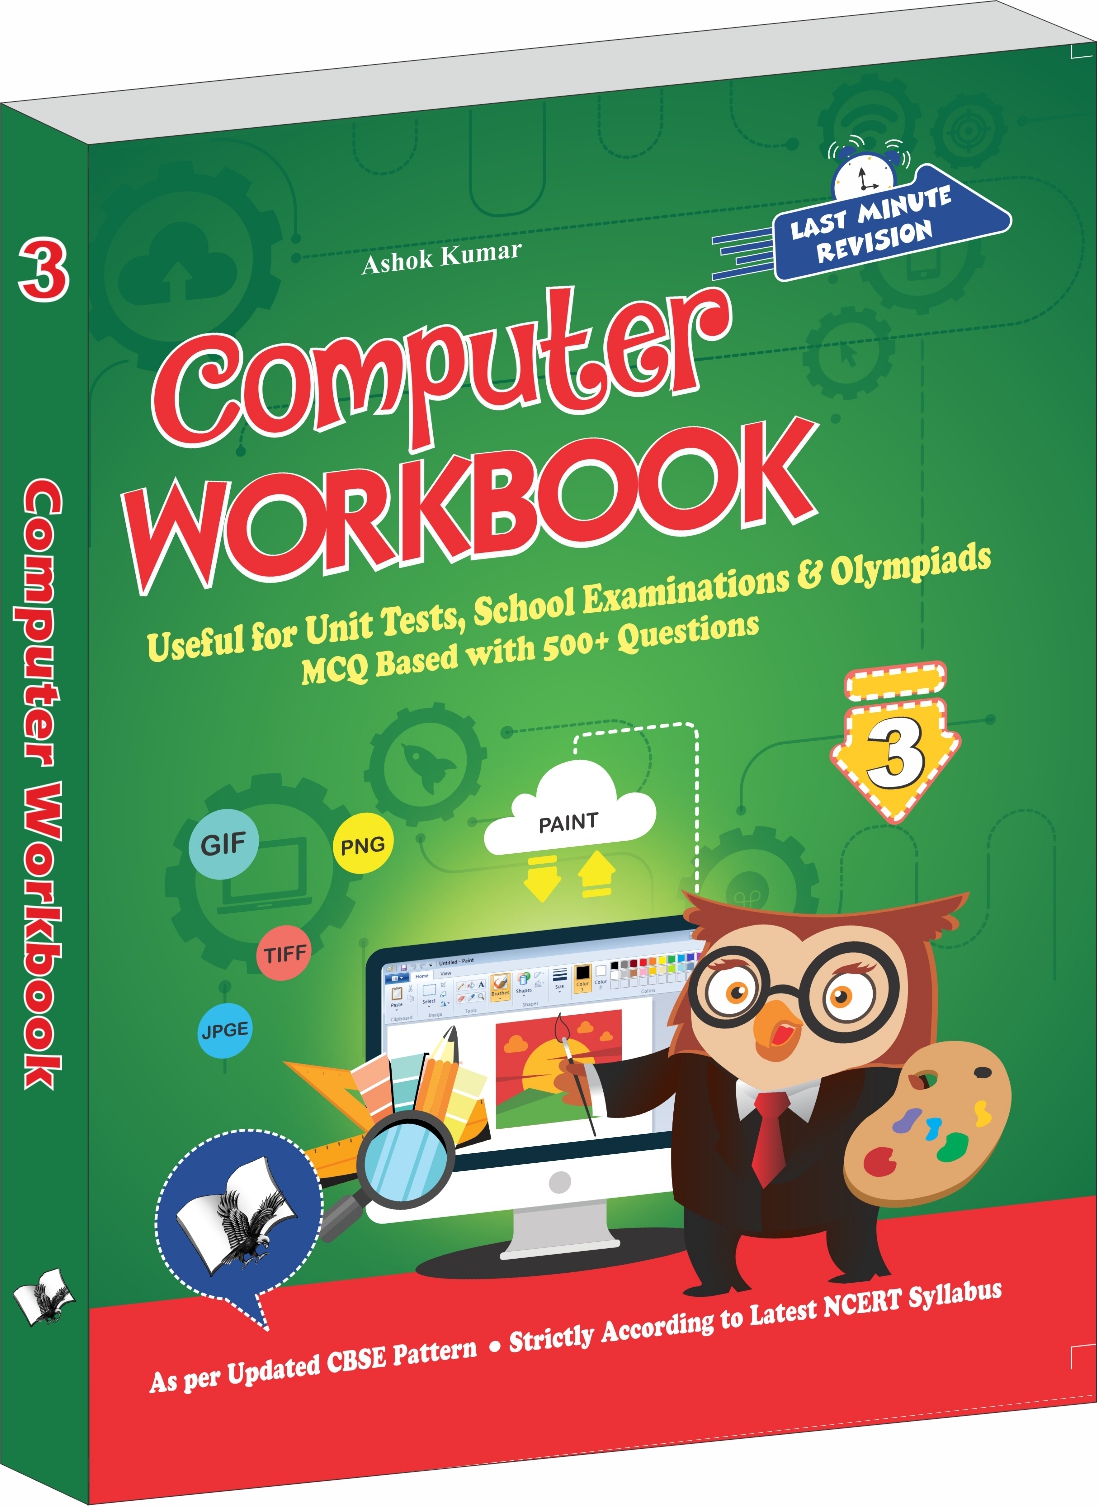 Computer Workbook Class 3-Useful for Unit Tests, School Examinations & Olympiads